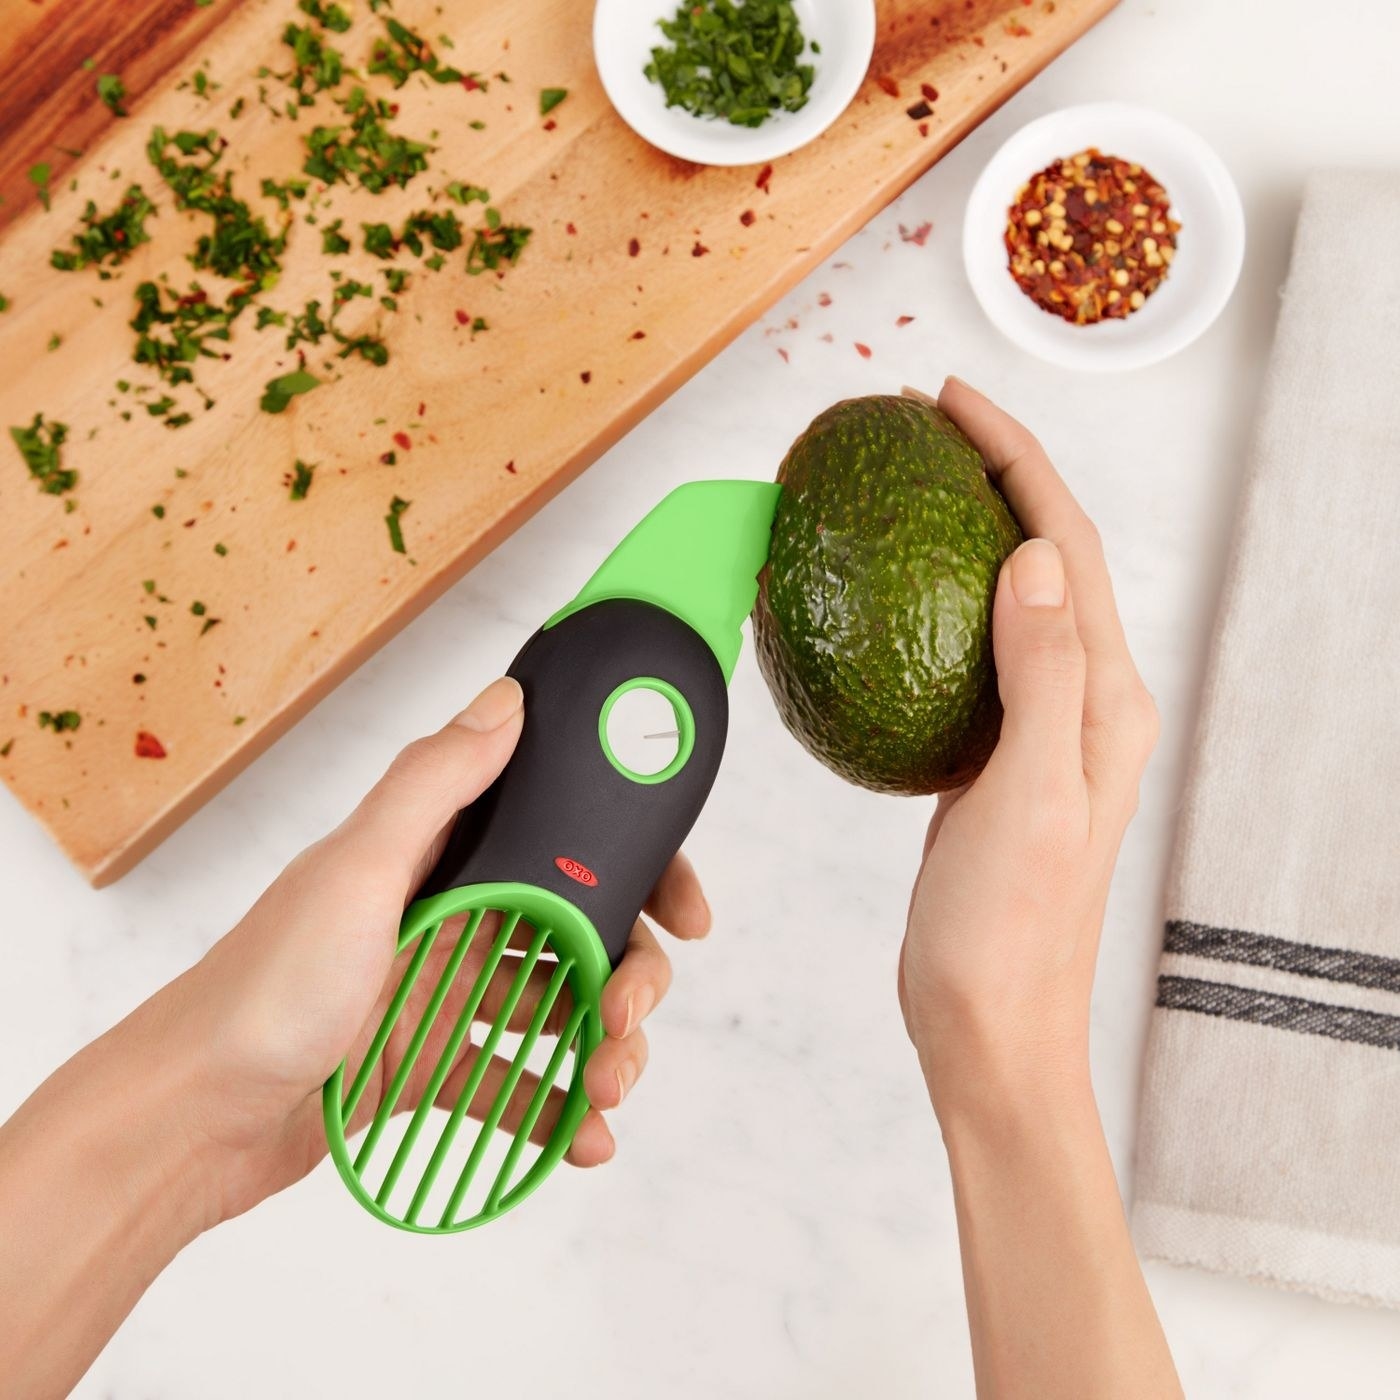 hands holding an avocado and a green and black avocado slicer